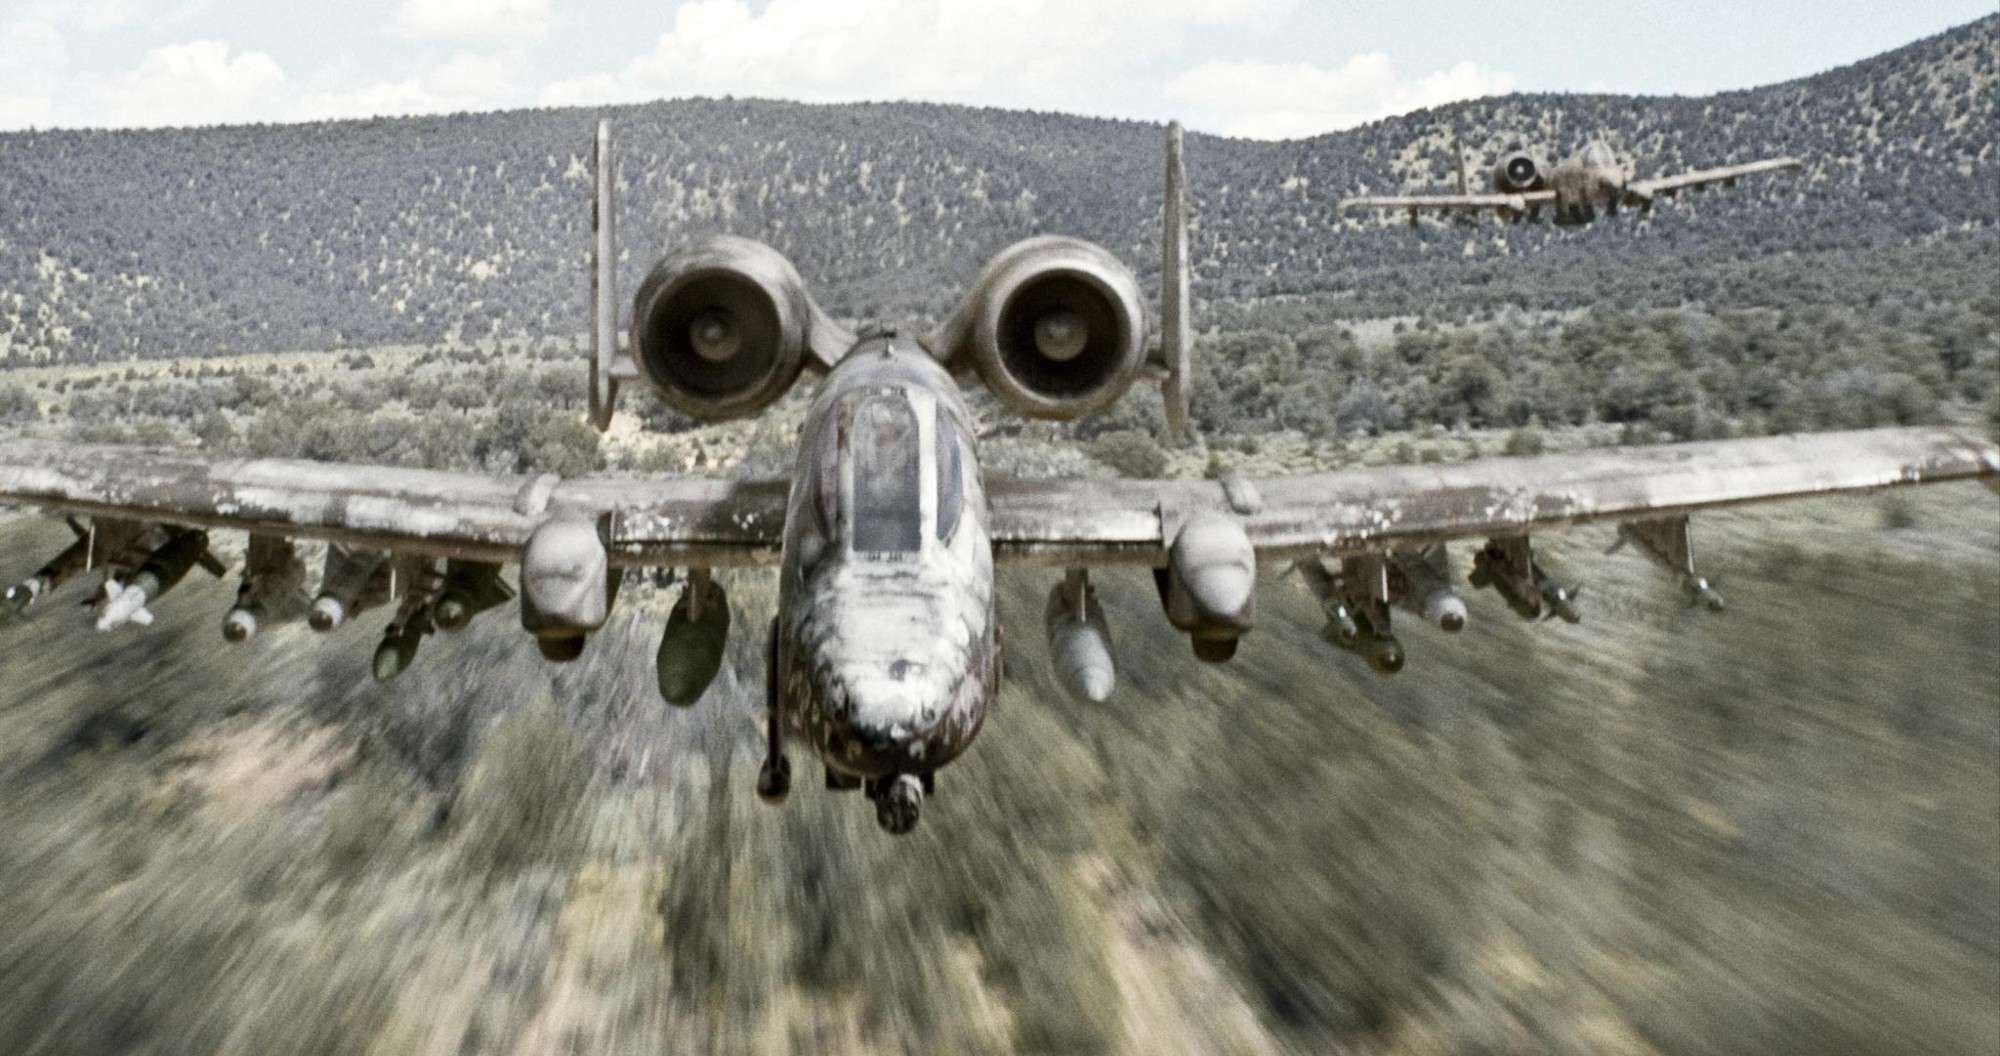 The A-10 refueled and rearmed on a public highway for the first time